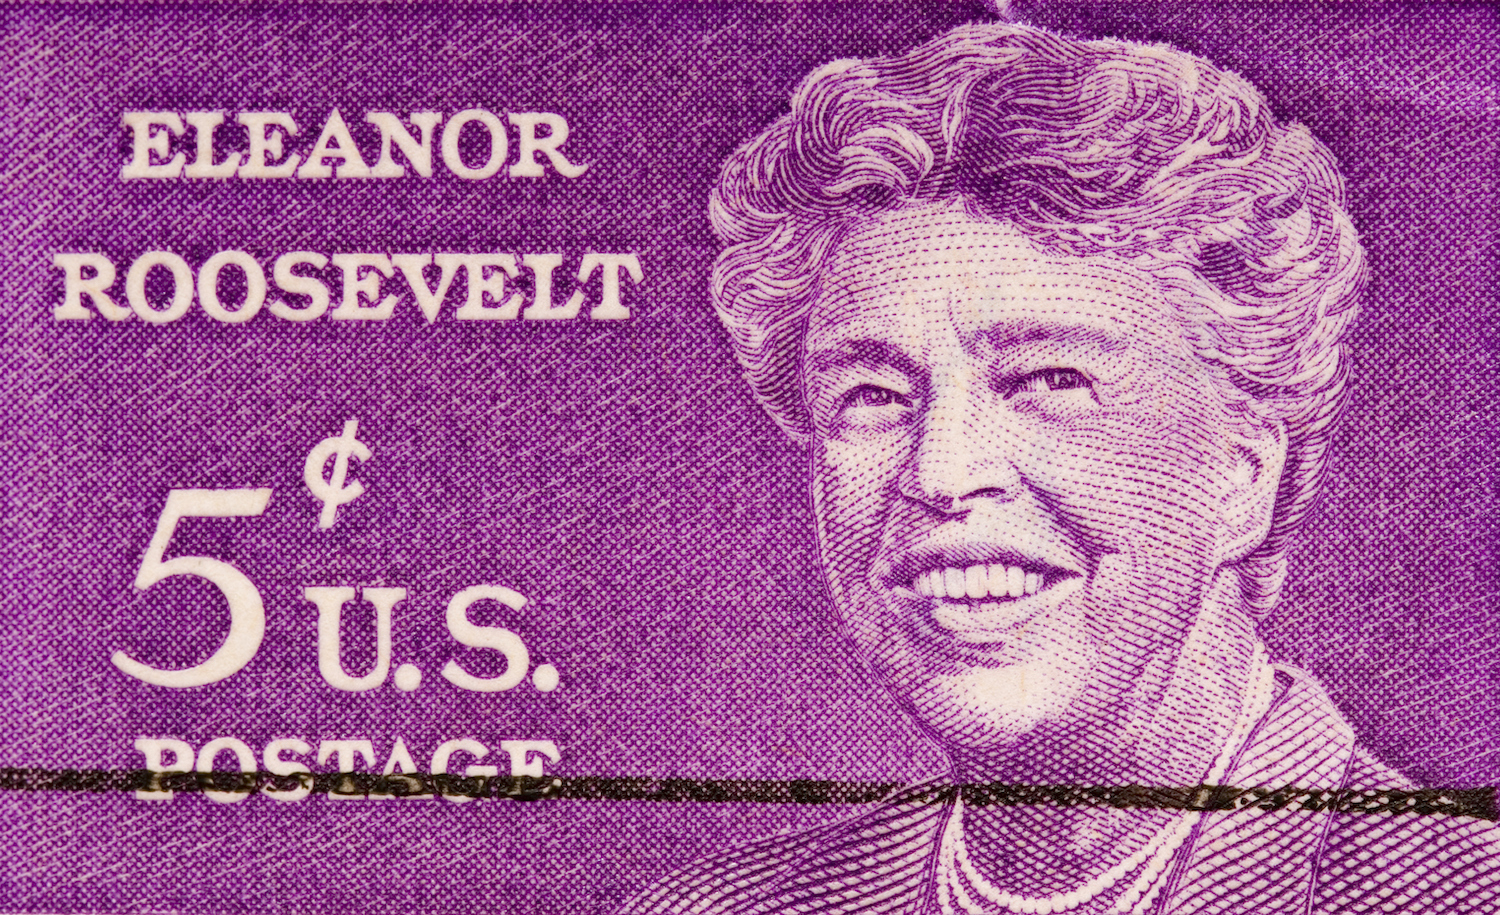 Image of a postal stamp depicting Eleanor Roosevelt, likely a highly sensitive person (HSP)